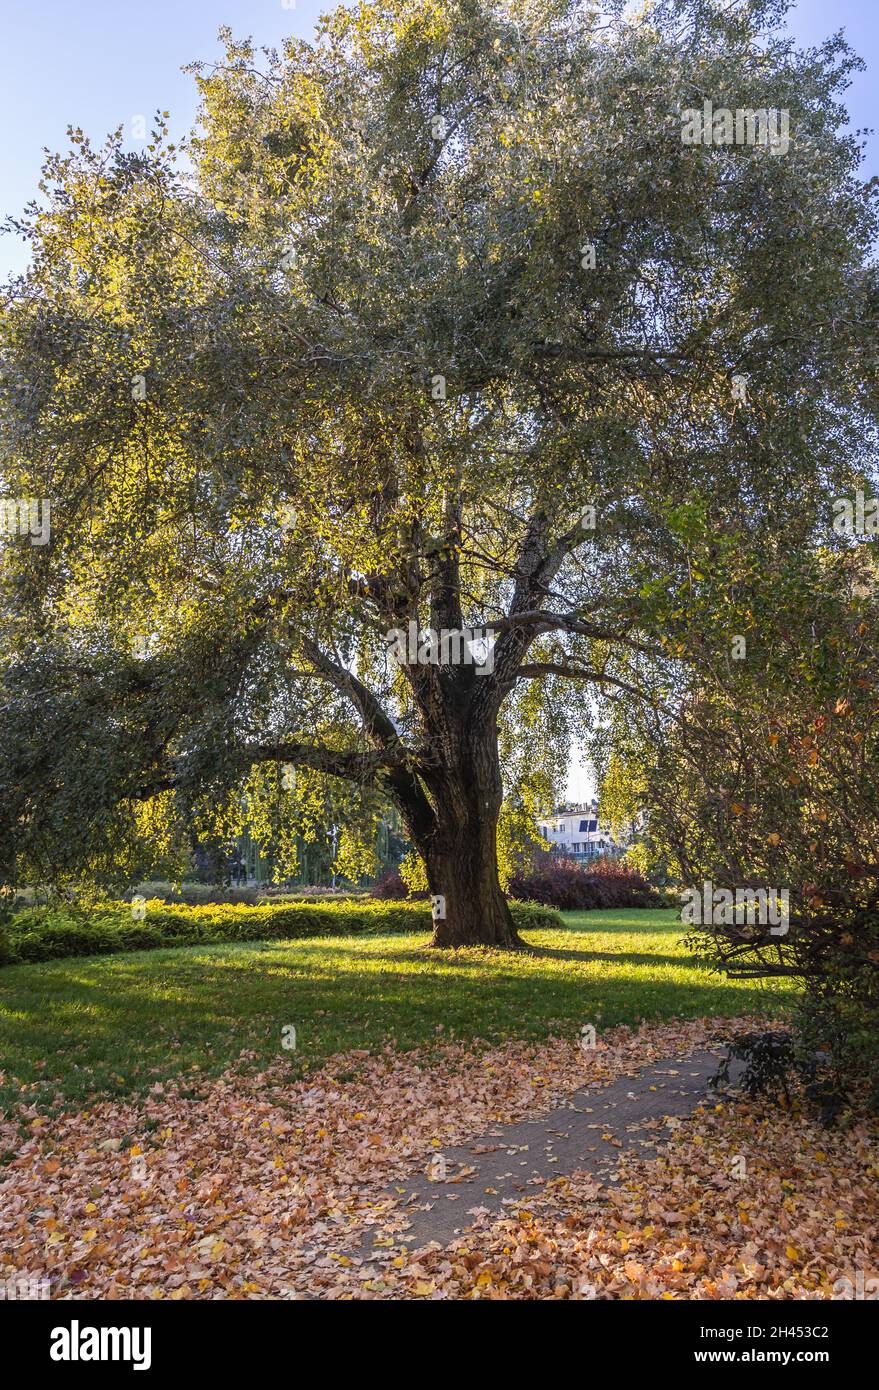 Nature monument Populus alba - silver poplar in Zaslaw Malicki Park located in the center of the Rakowiec estate in Warsaw, capital of Poland Stock Photo